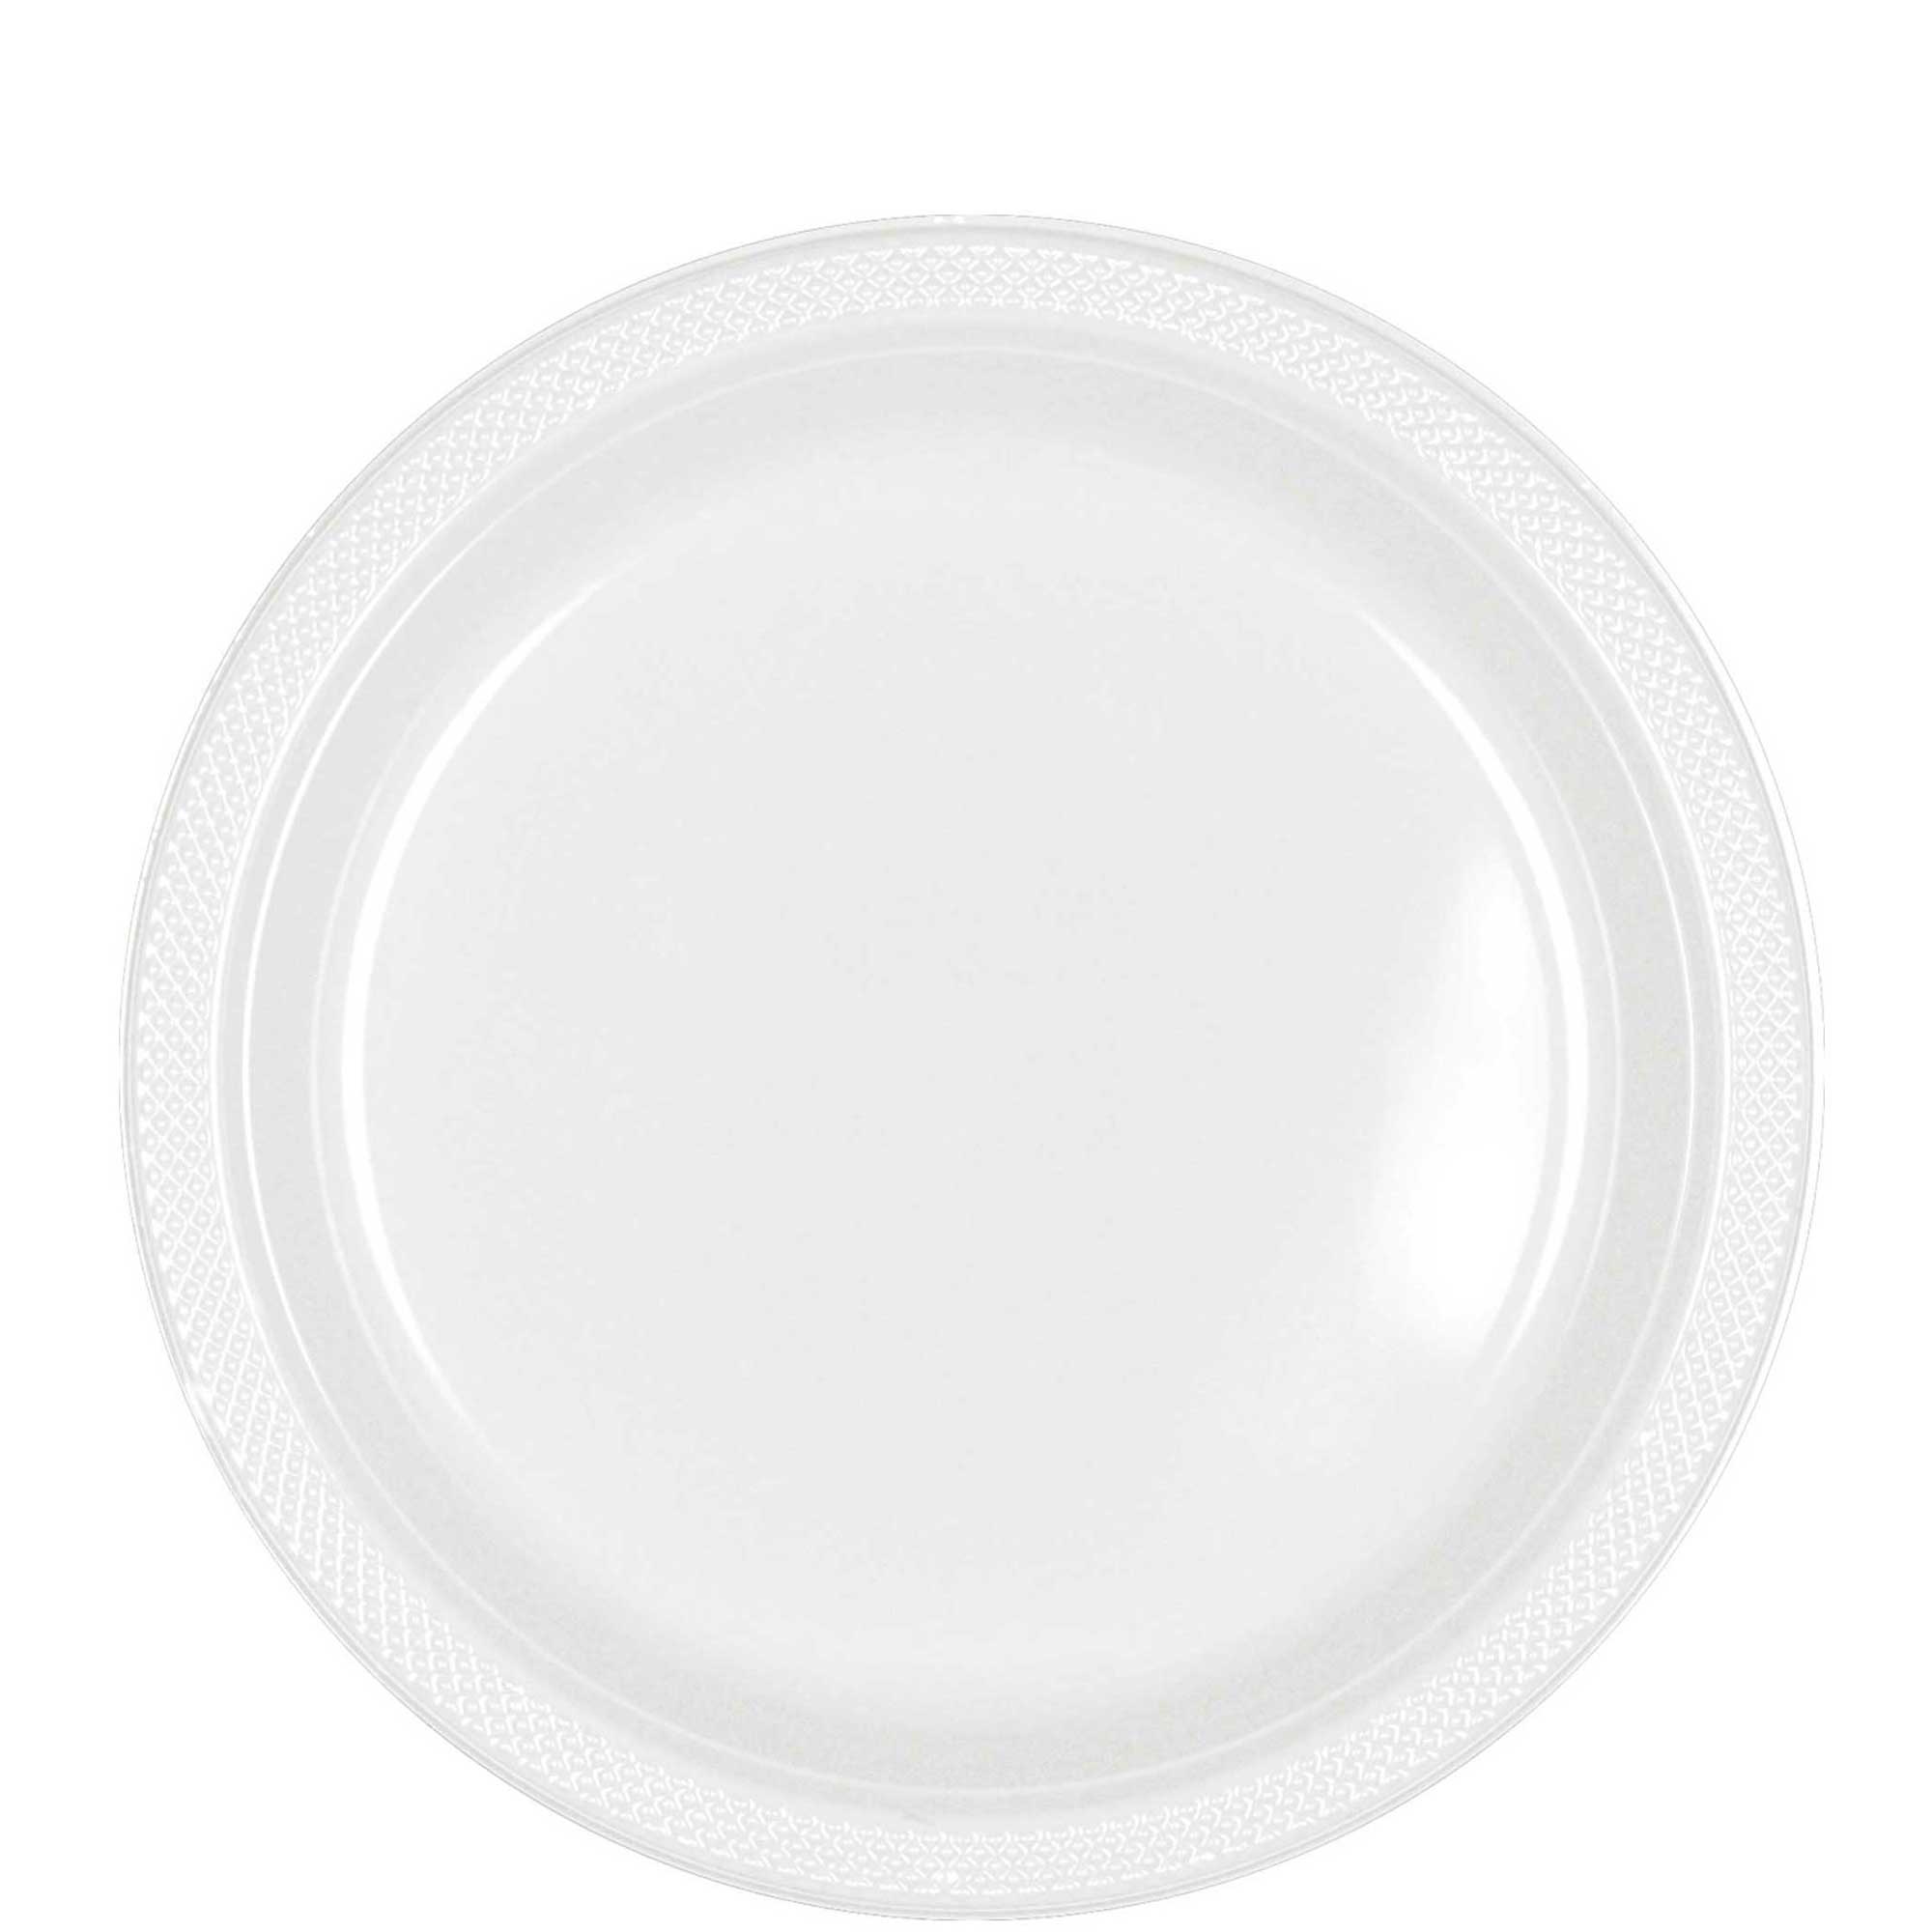 White Plastic Plates 9in, 20pcs Solid Tableware - Party Centre